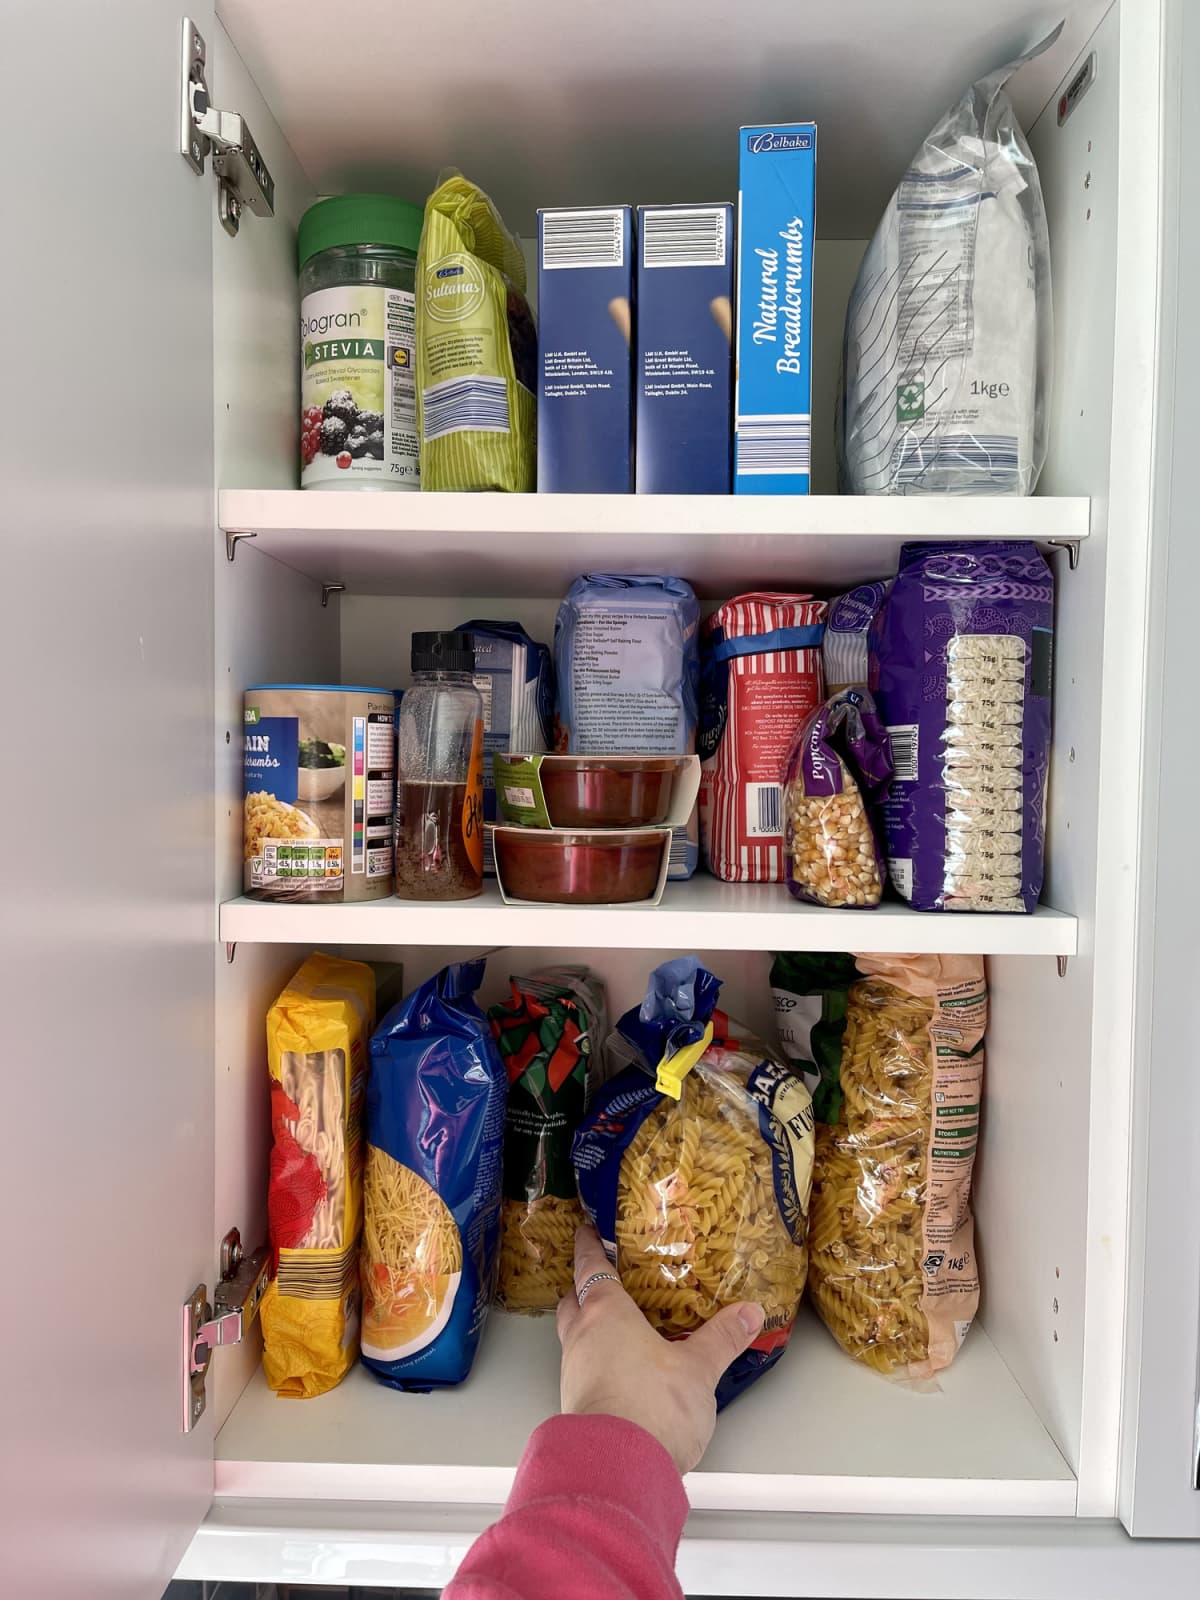 A kitchen cabinet full of grocery items